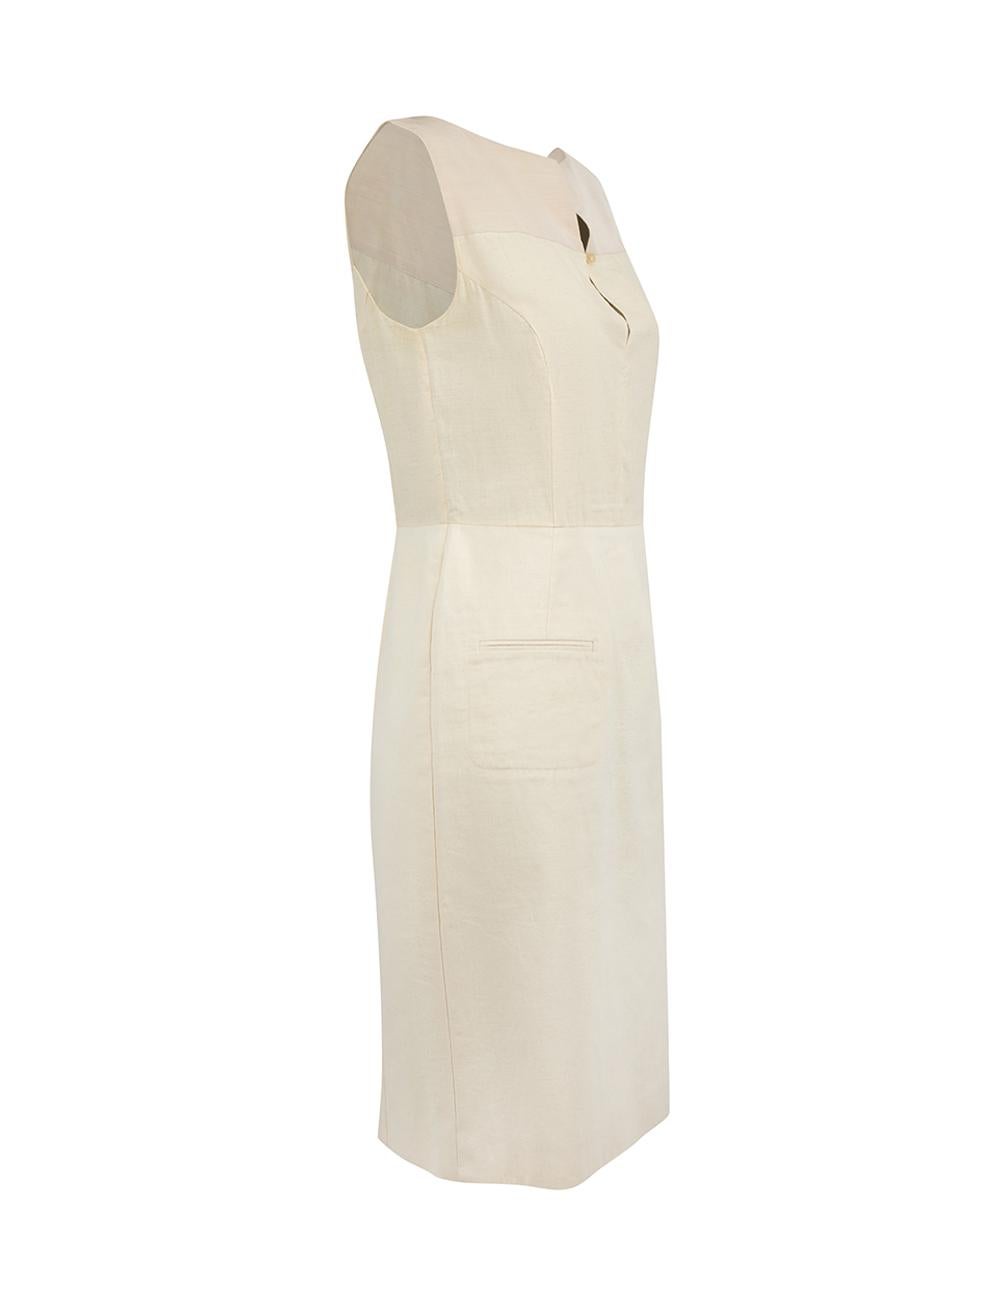 CONDITION is Very good. Minimal wear to dress is evident. Minimal wear to the front neckline with two small marks on this used Narciso Rodriguez designer resale item.

Details
Ecru
Cotton
Dress
Sleeveless
Front button keyhole detail
Panelled
Midi
2x